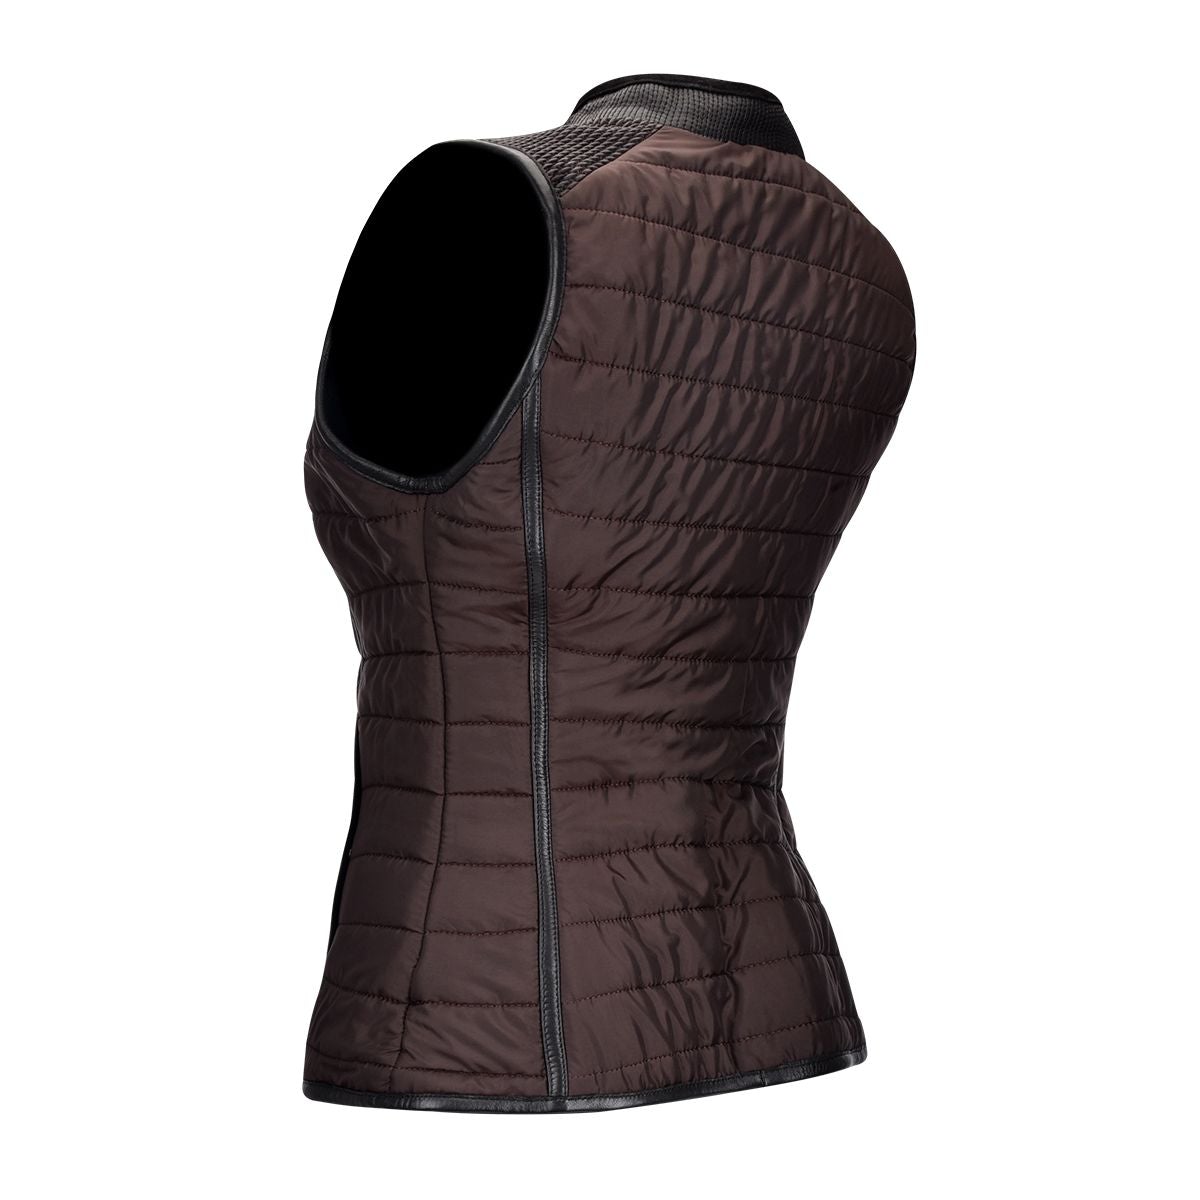 M253COB - Cuadra montecarlo black casual fashion quilted leather vest for women-Kuet.us